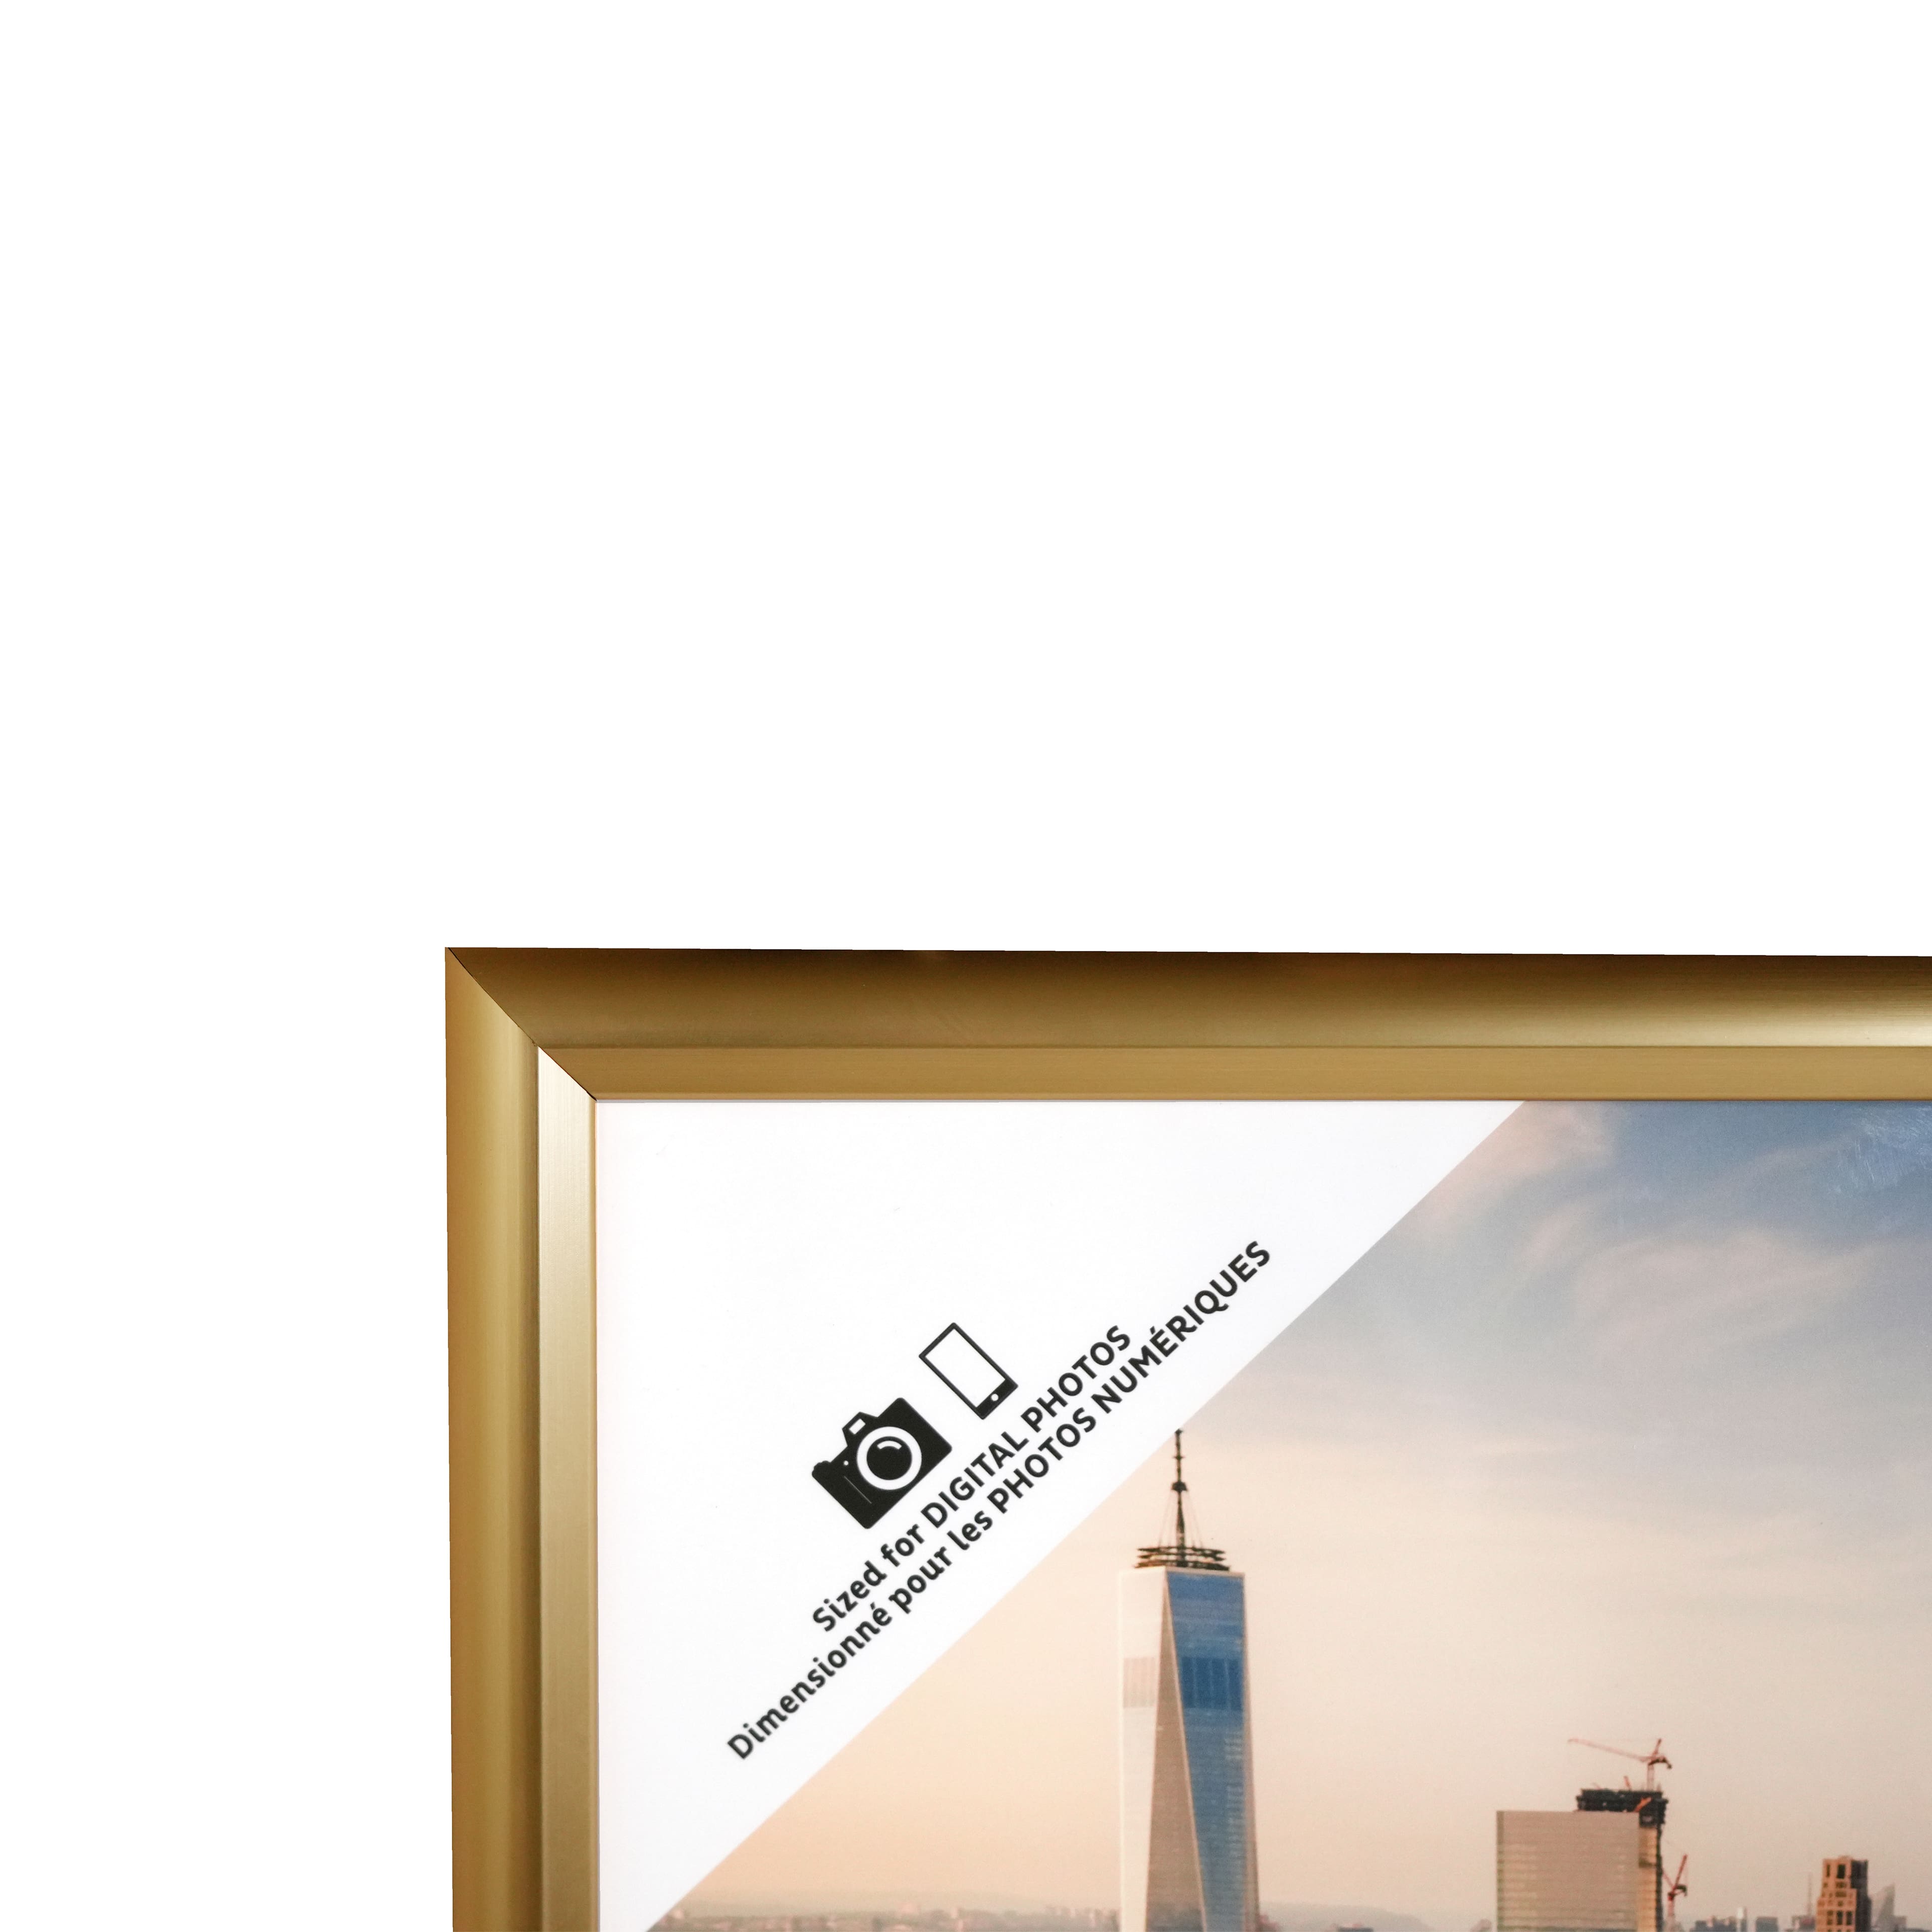 Golden Finish Poster Frame, Downtown&#x2122; by Studio D&#xE9;cor&#xAE;